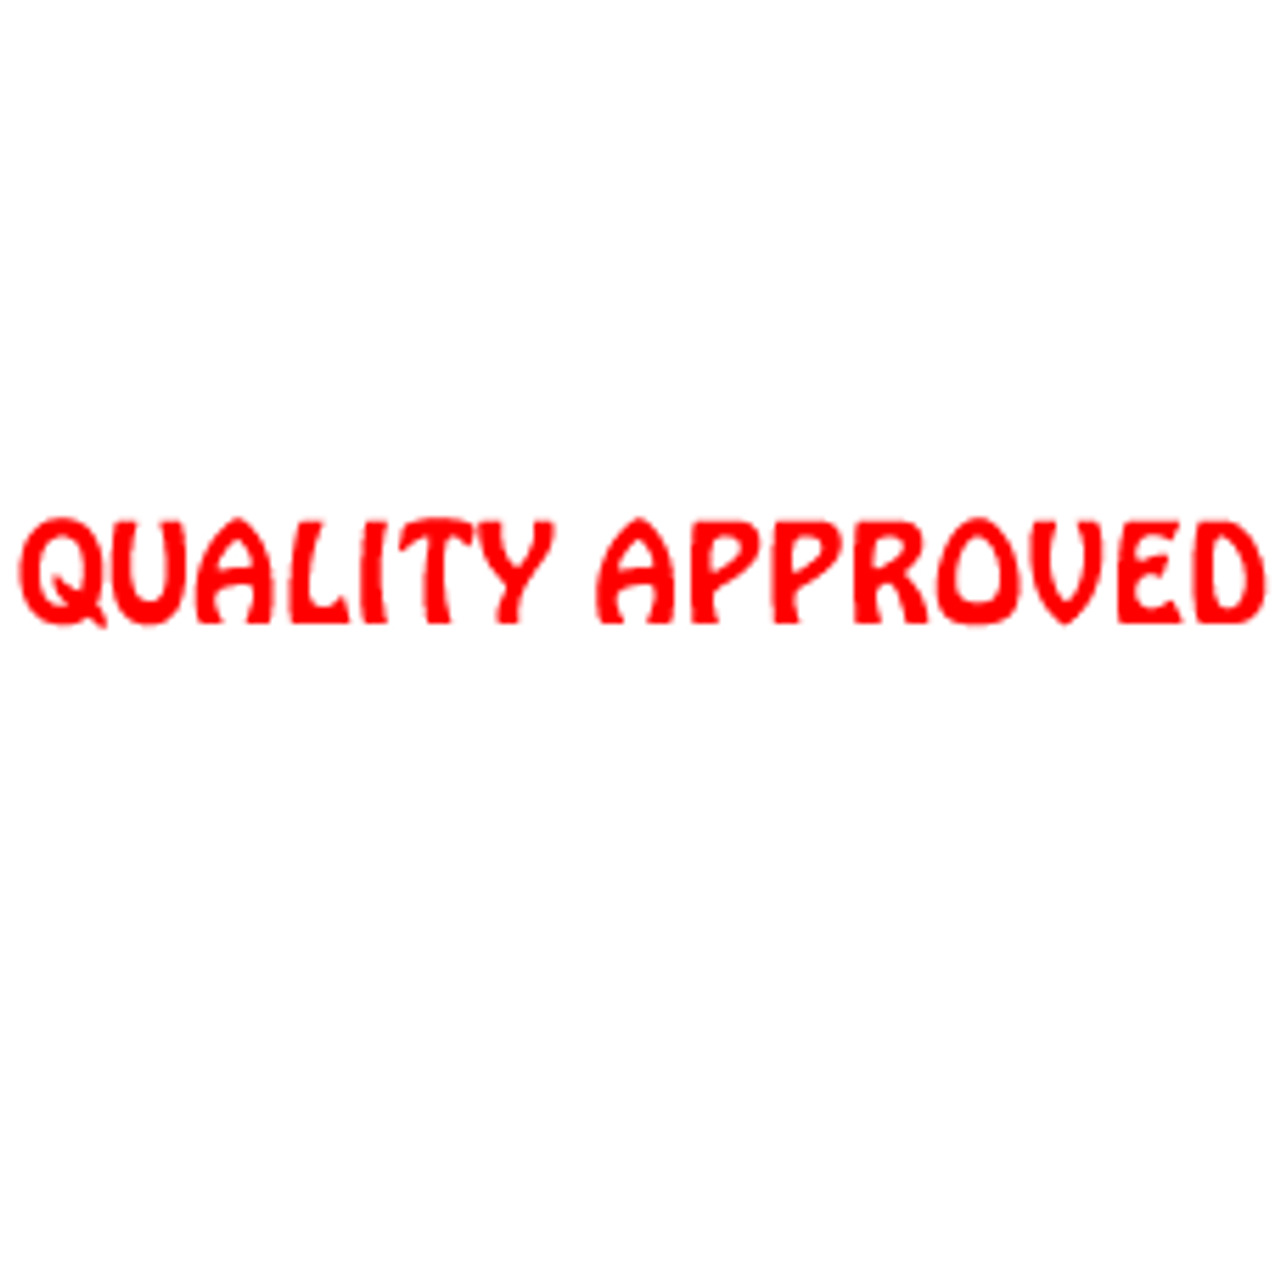 QUALITY APPROVED QA Rubber Stamp for office use self-inking